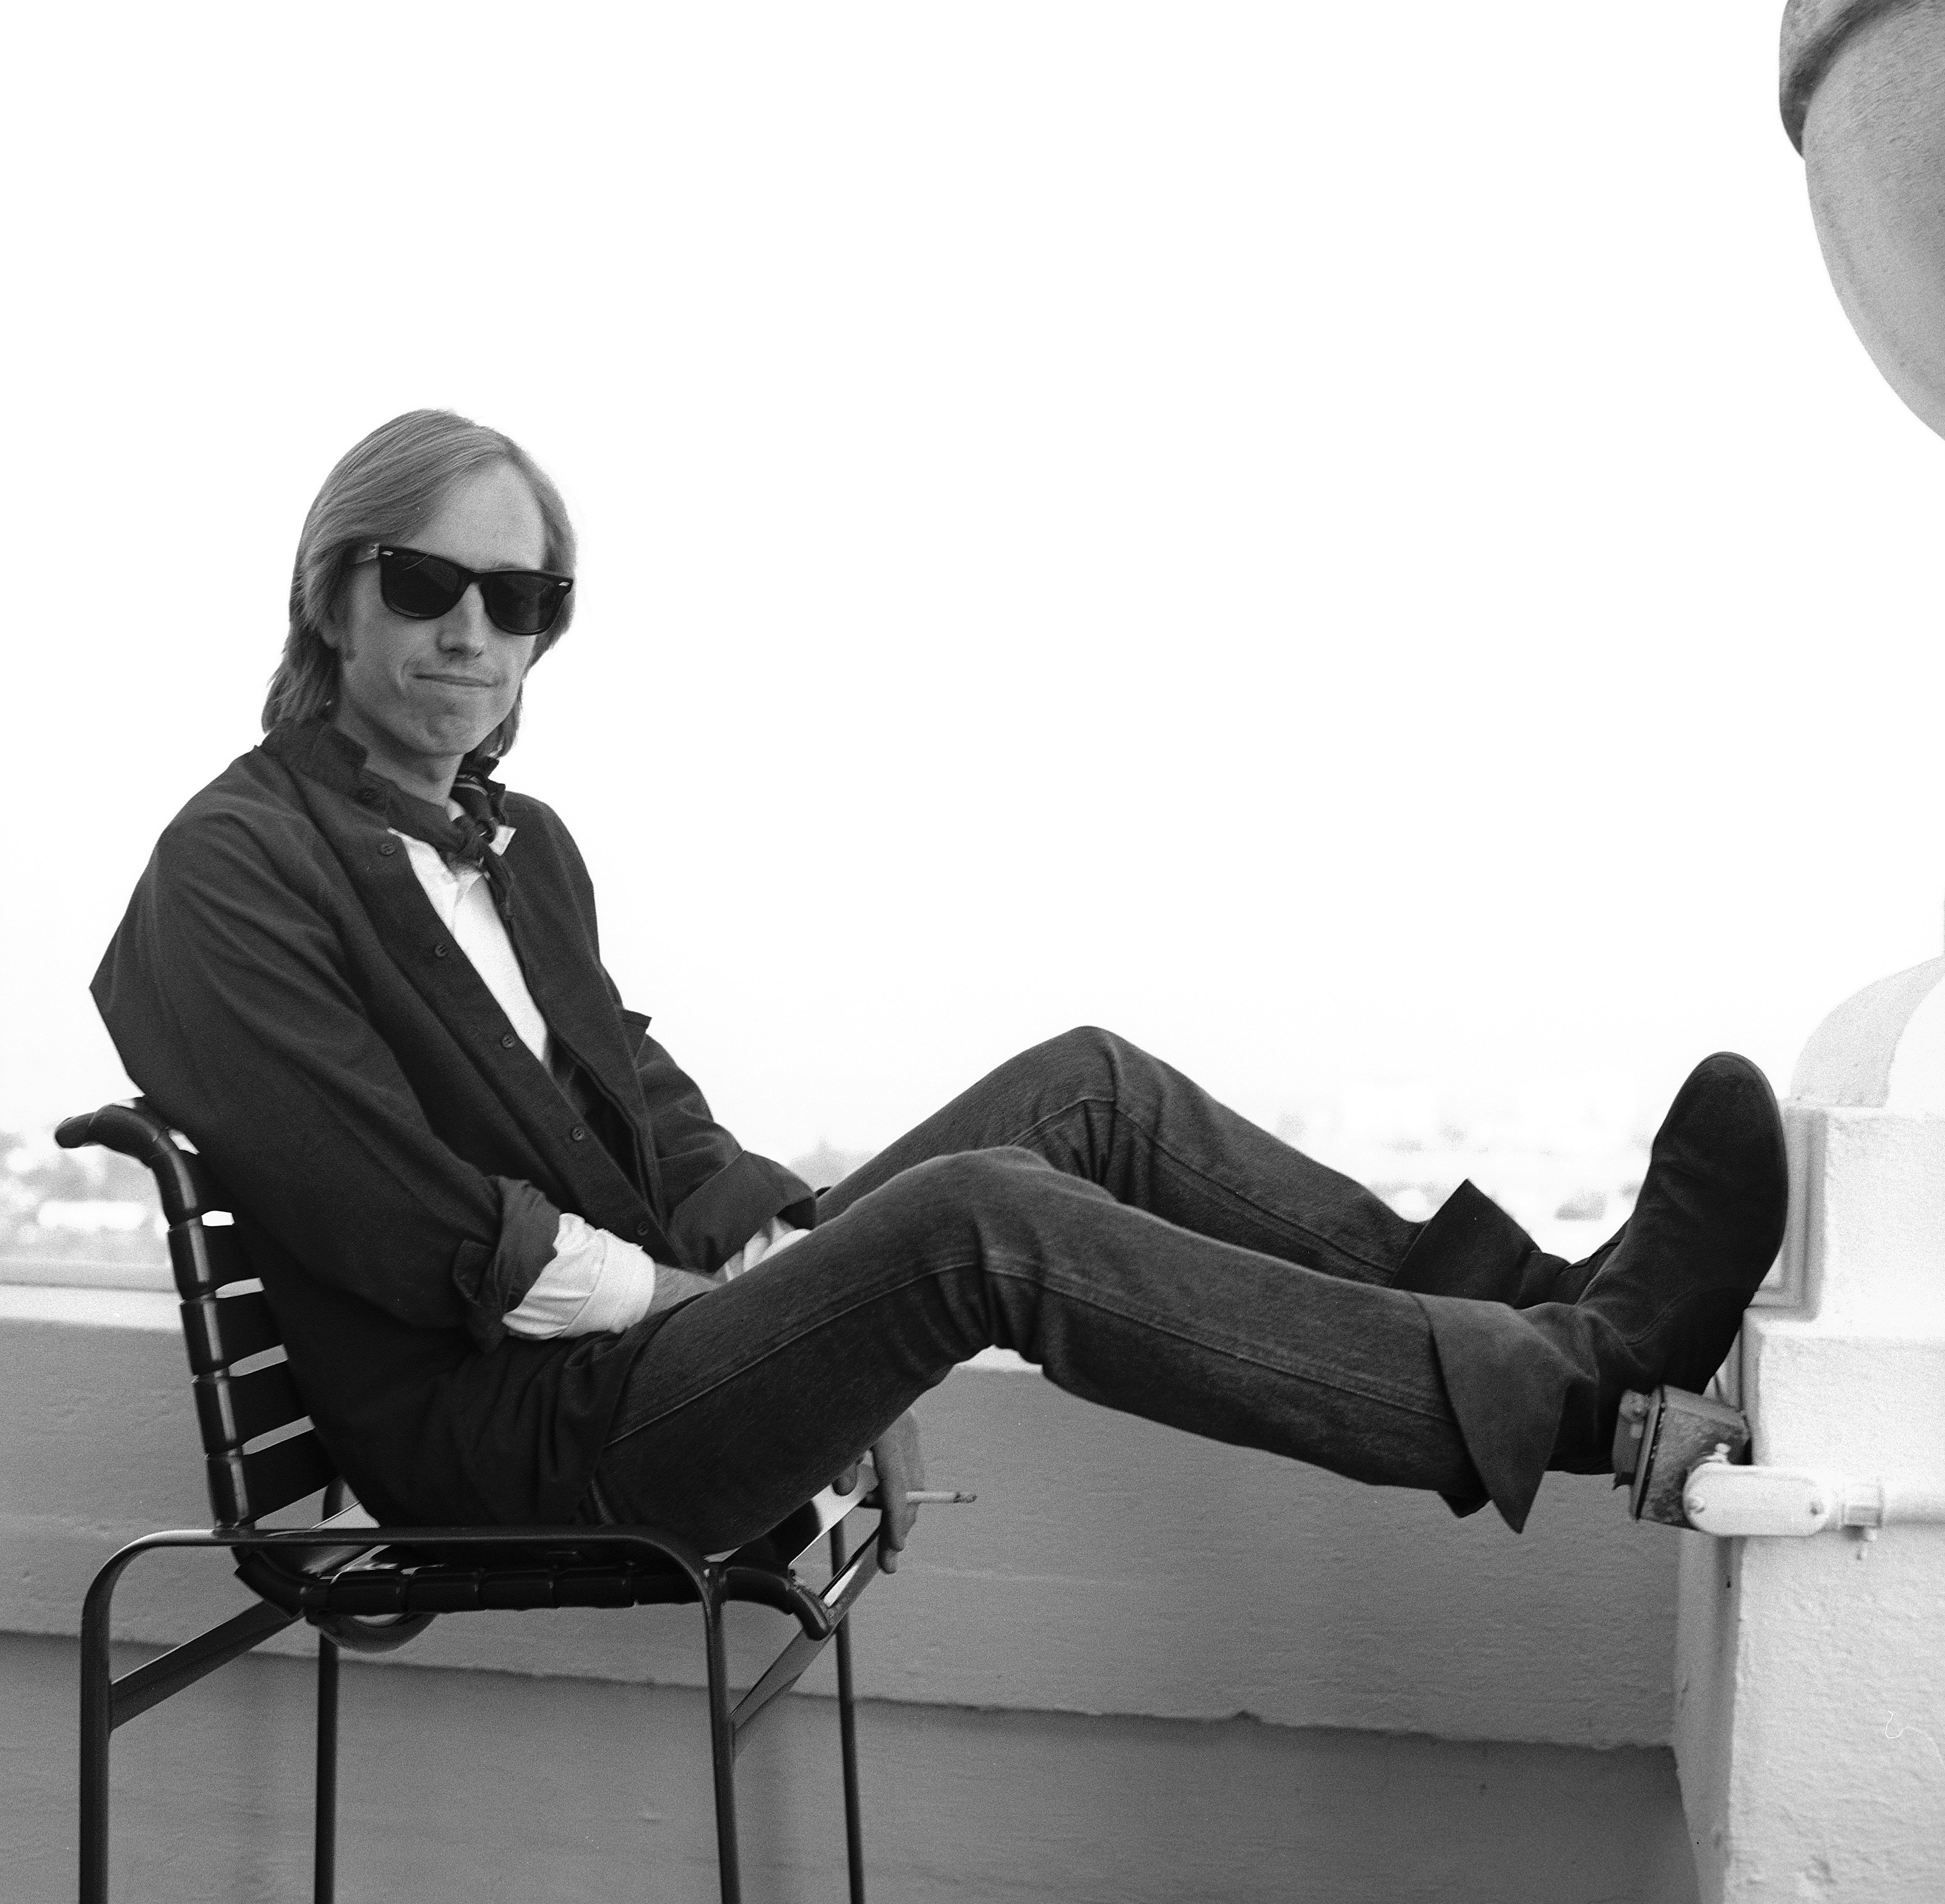 A black and white picture of Tom Petty sitting in a chair and resting his feet on a wall.